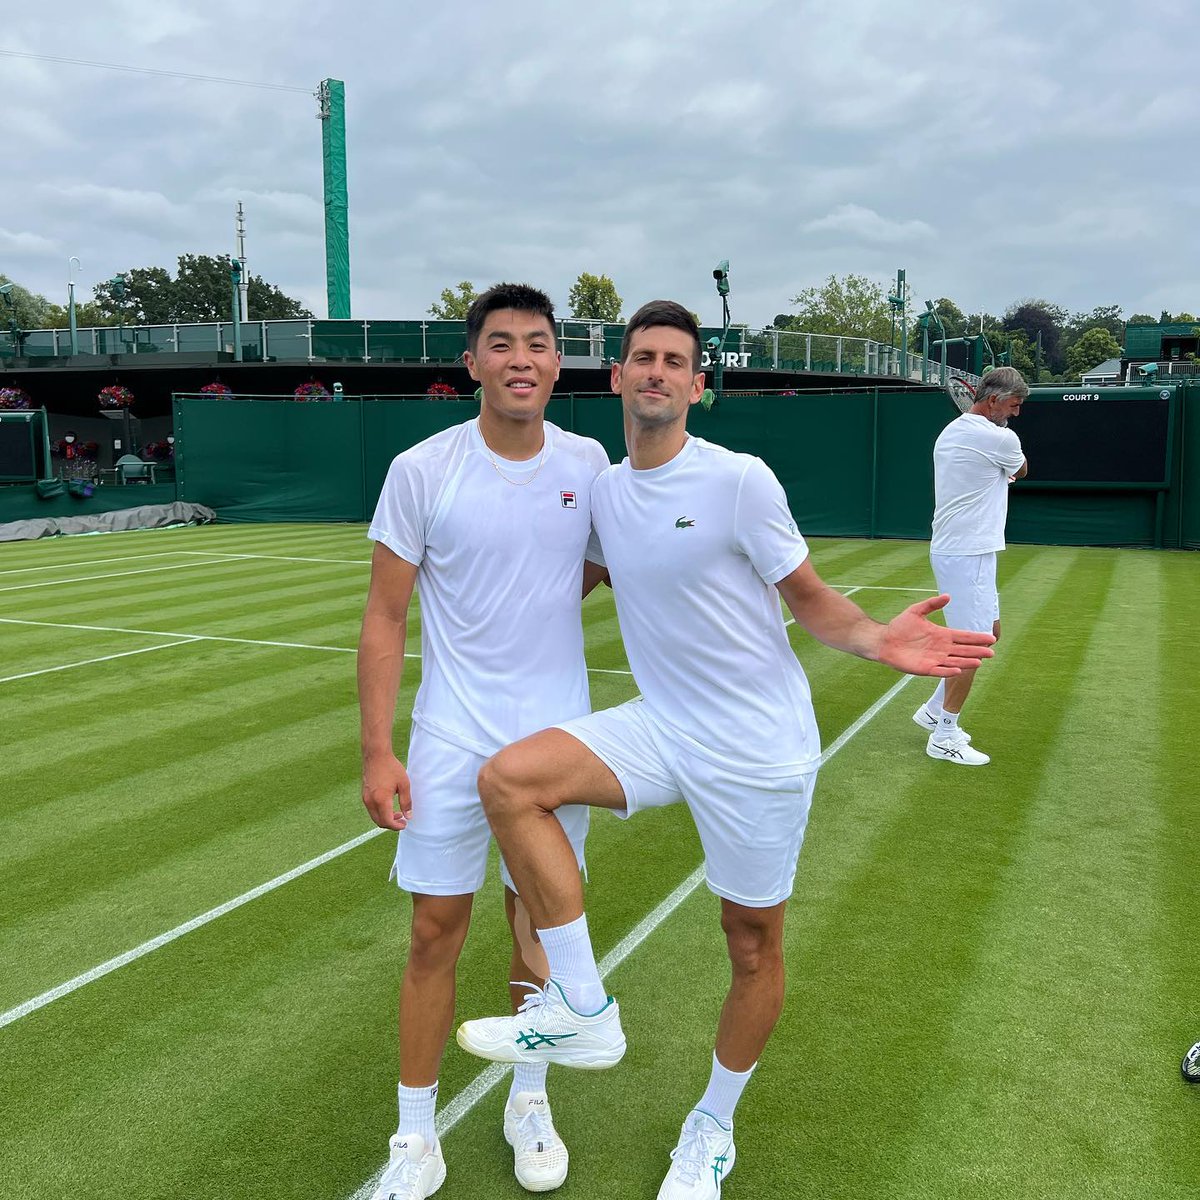 These two could face each other in 2R  #Wimbledon https://t.co/QkzrGmre8p